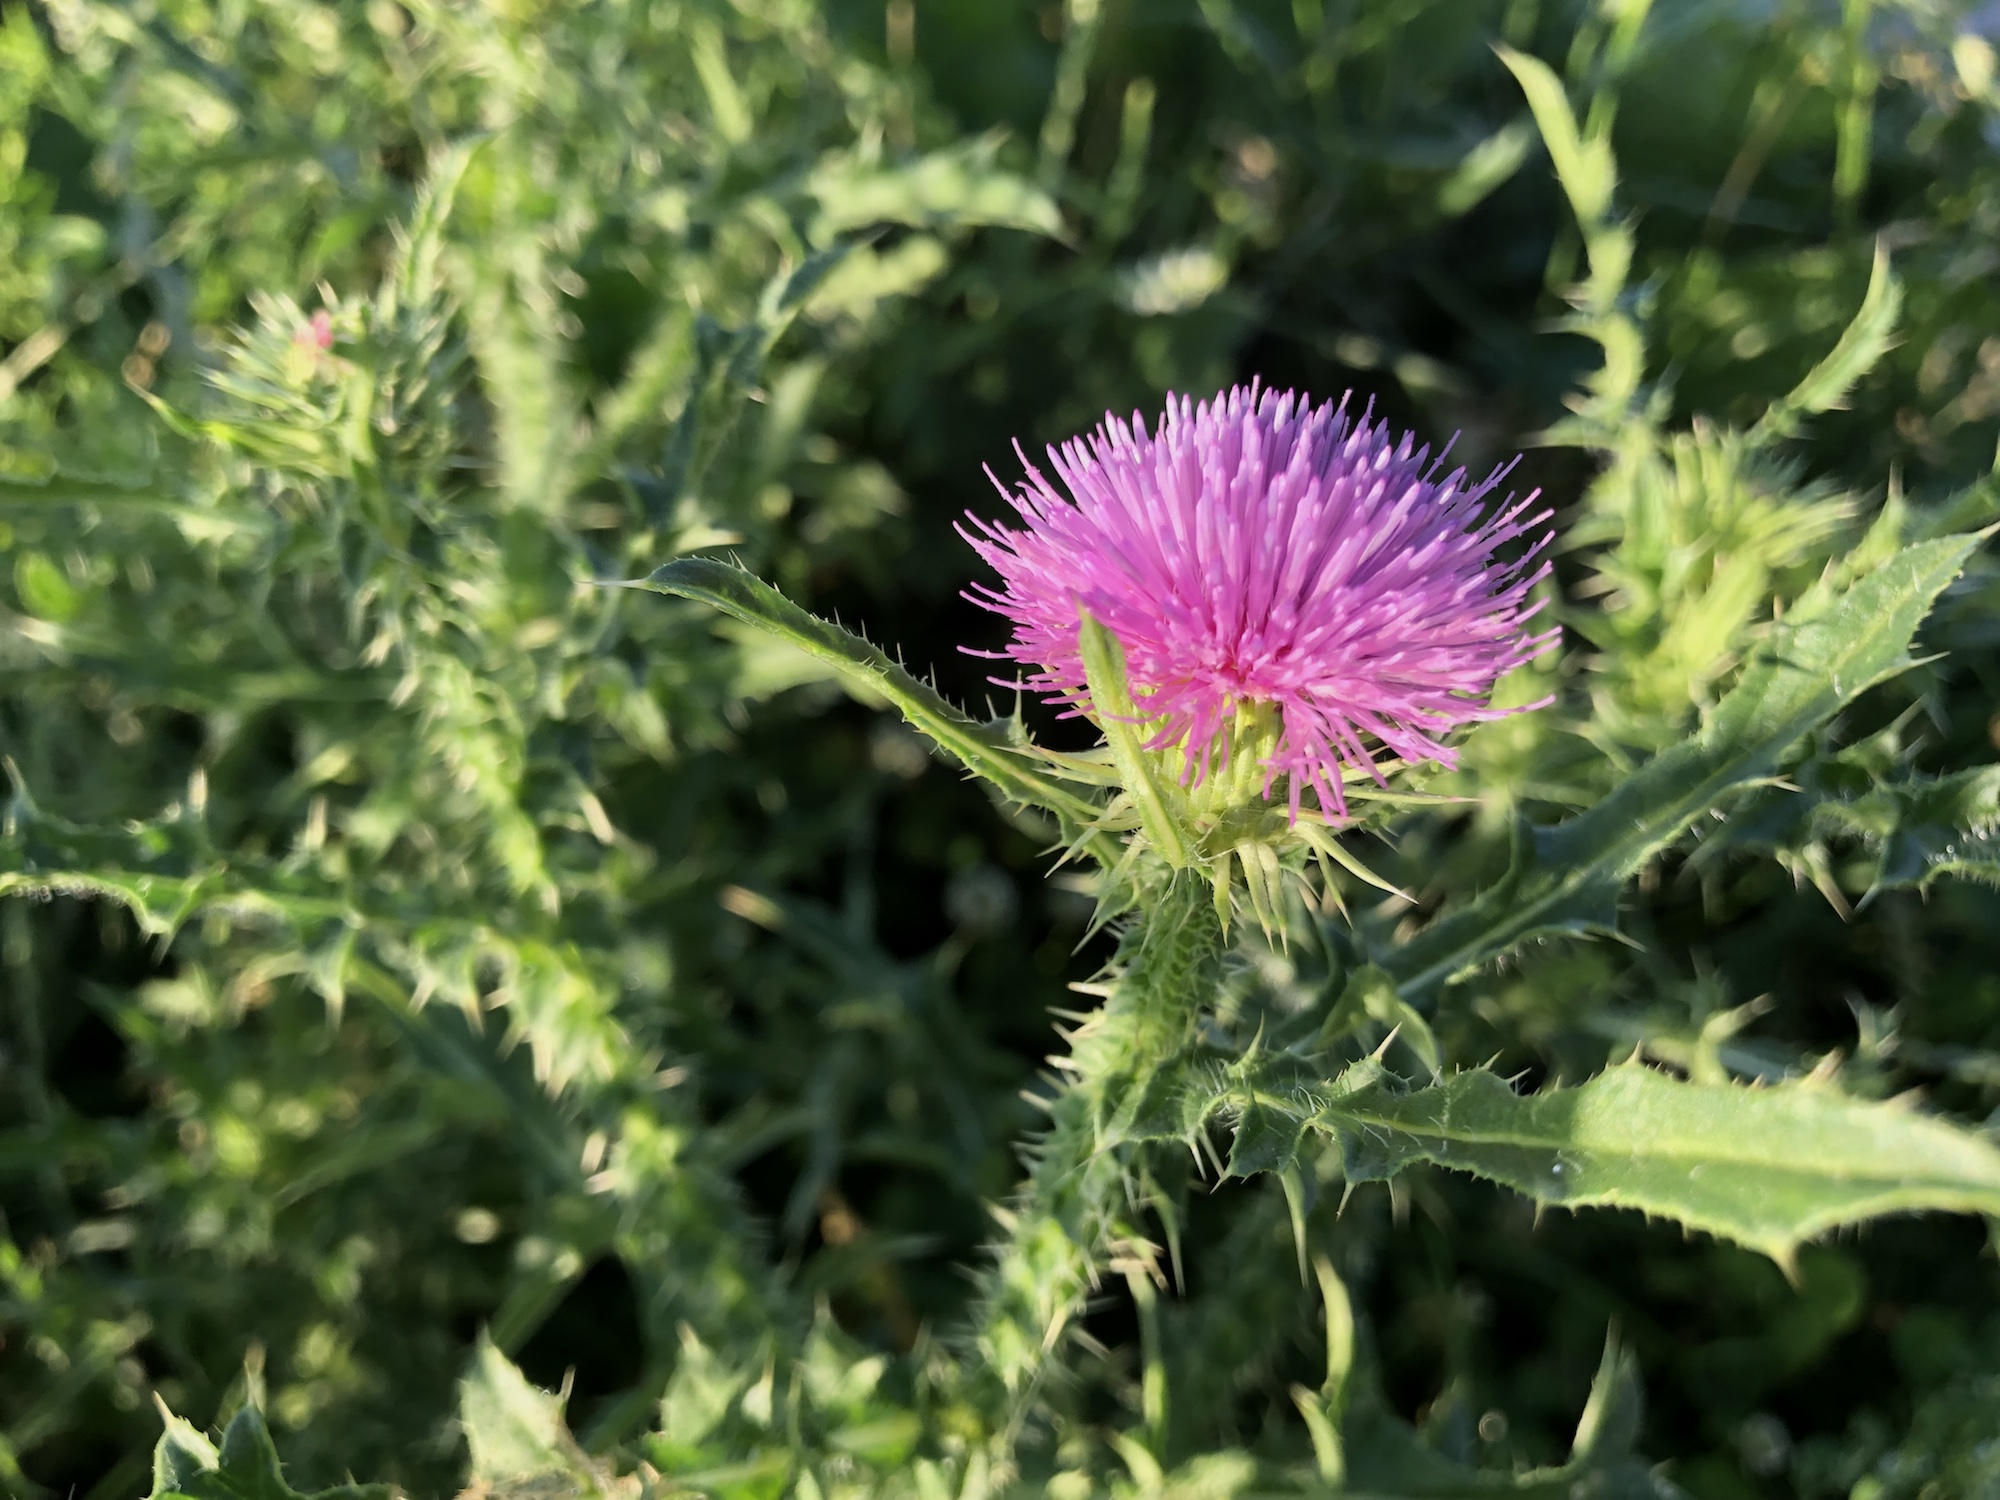 Plumeless Thistle by Wingra Boats on shore of Lake Wingra in Madison, Wisconsin on July 11, 2019.